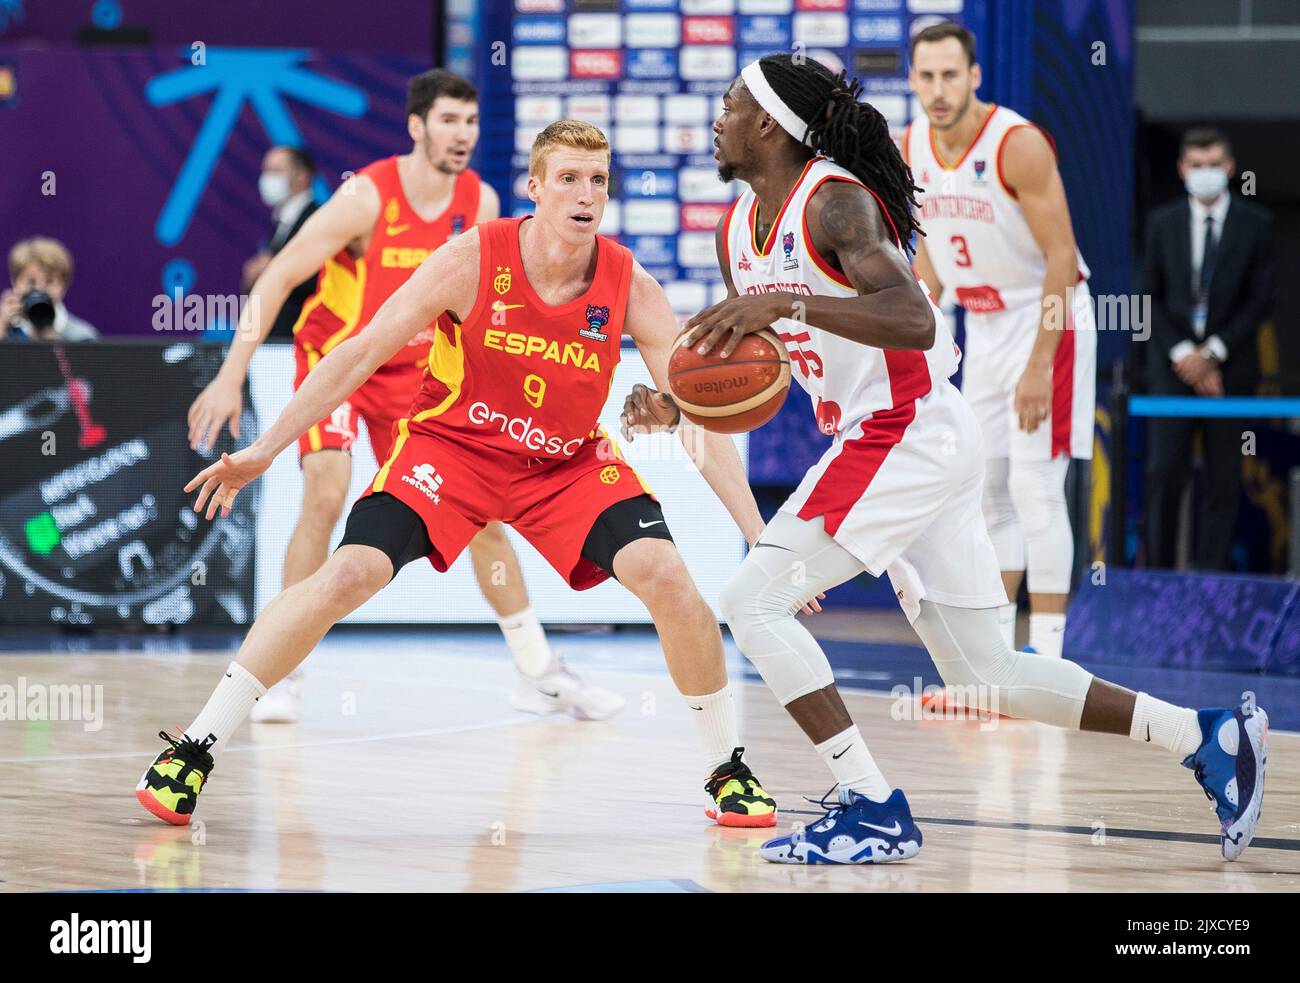 Tbilisi, Georgia, 6th September 2022. Marko Simonovic of Montenegro defending from Kendrick Dennard Perry of Montenegro during the FIBA EuroBasket 2022 group A match between Montenegro and Spain at Tbilisi Arena in Tbilisi, Georgia. September 6, 2022. Credit: Nikola Krstic/Alamy Stock Photo